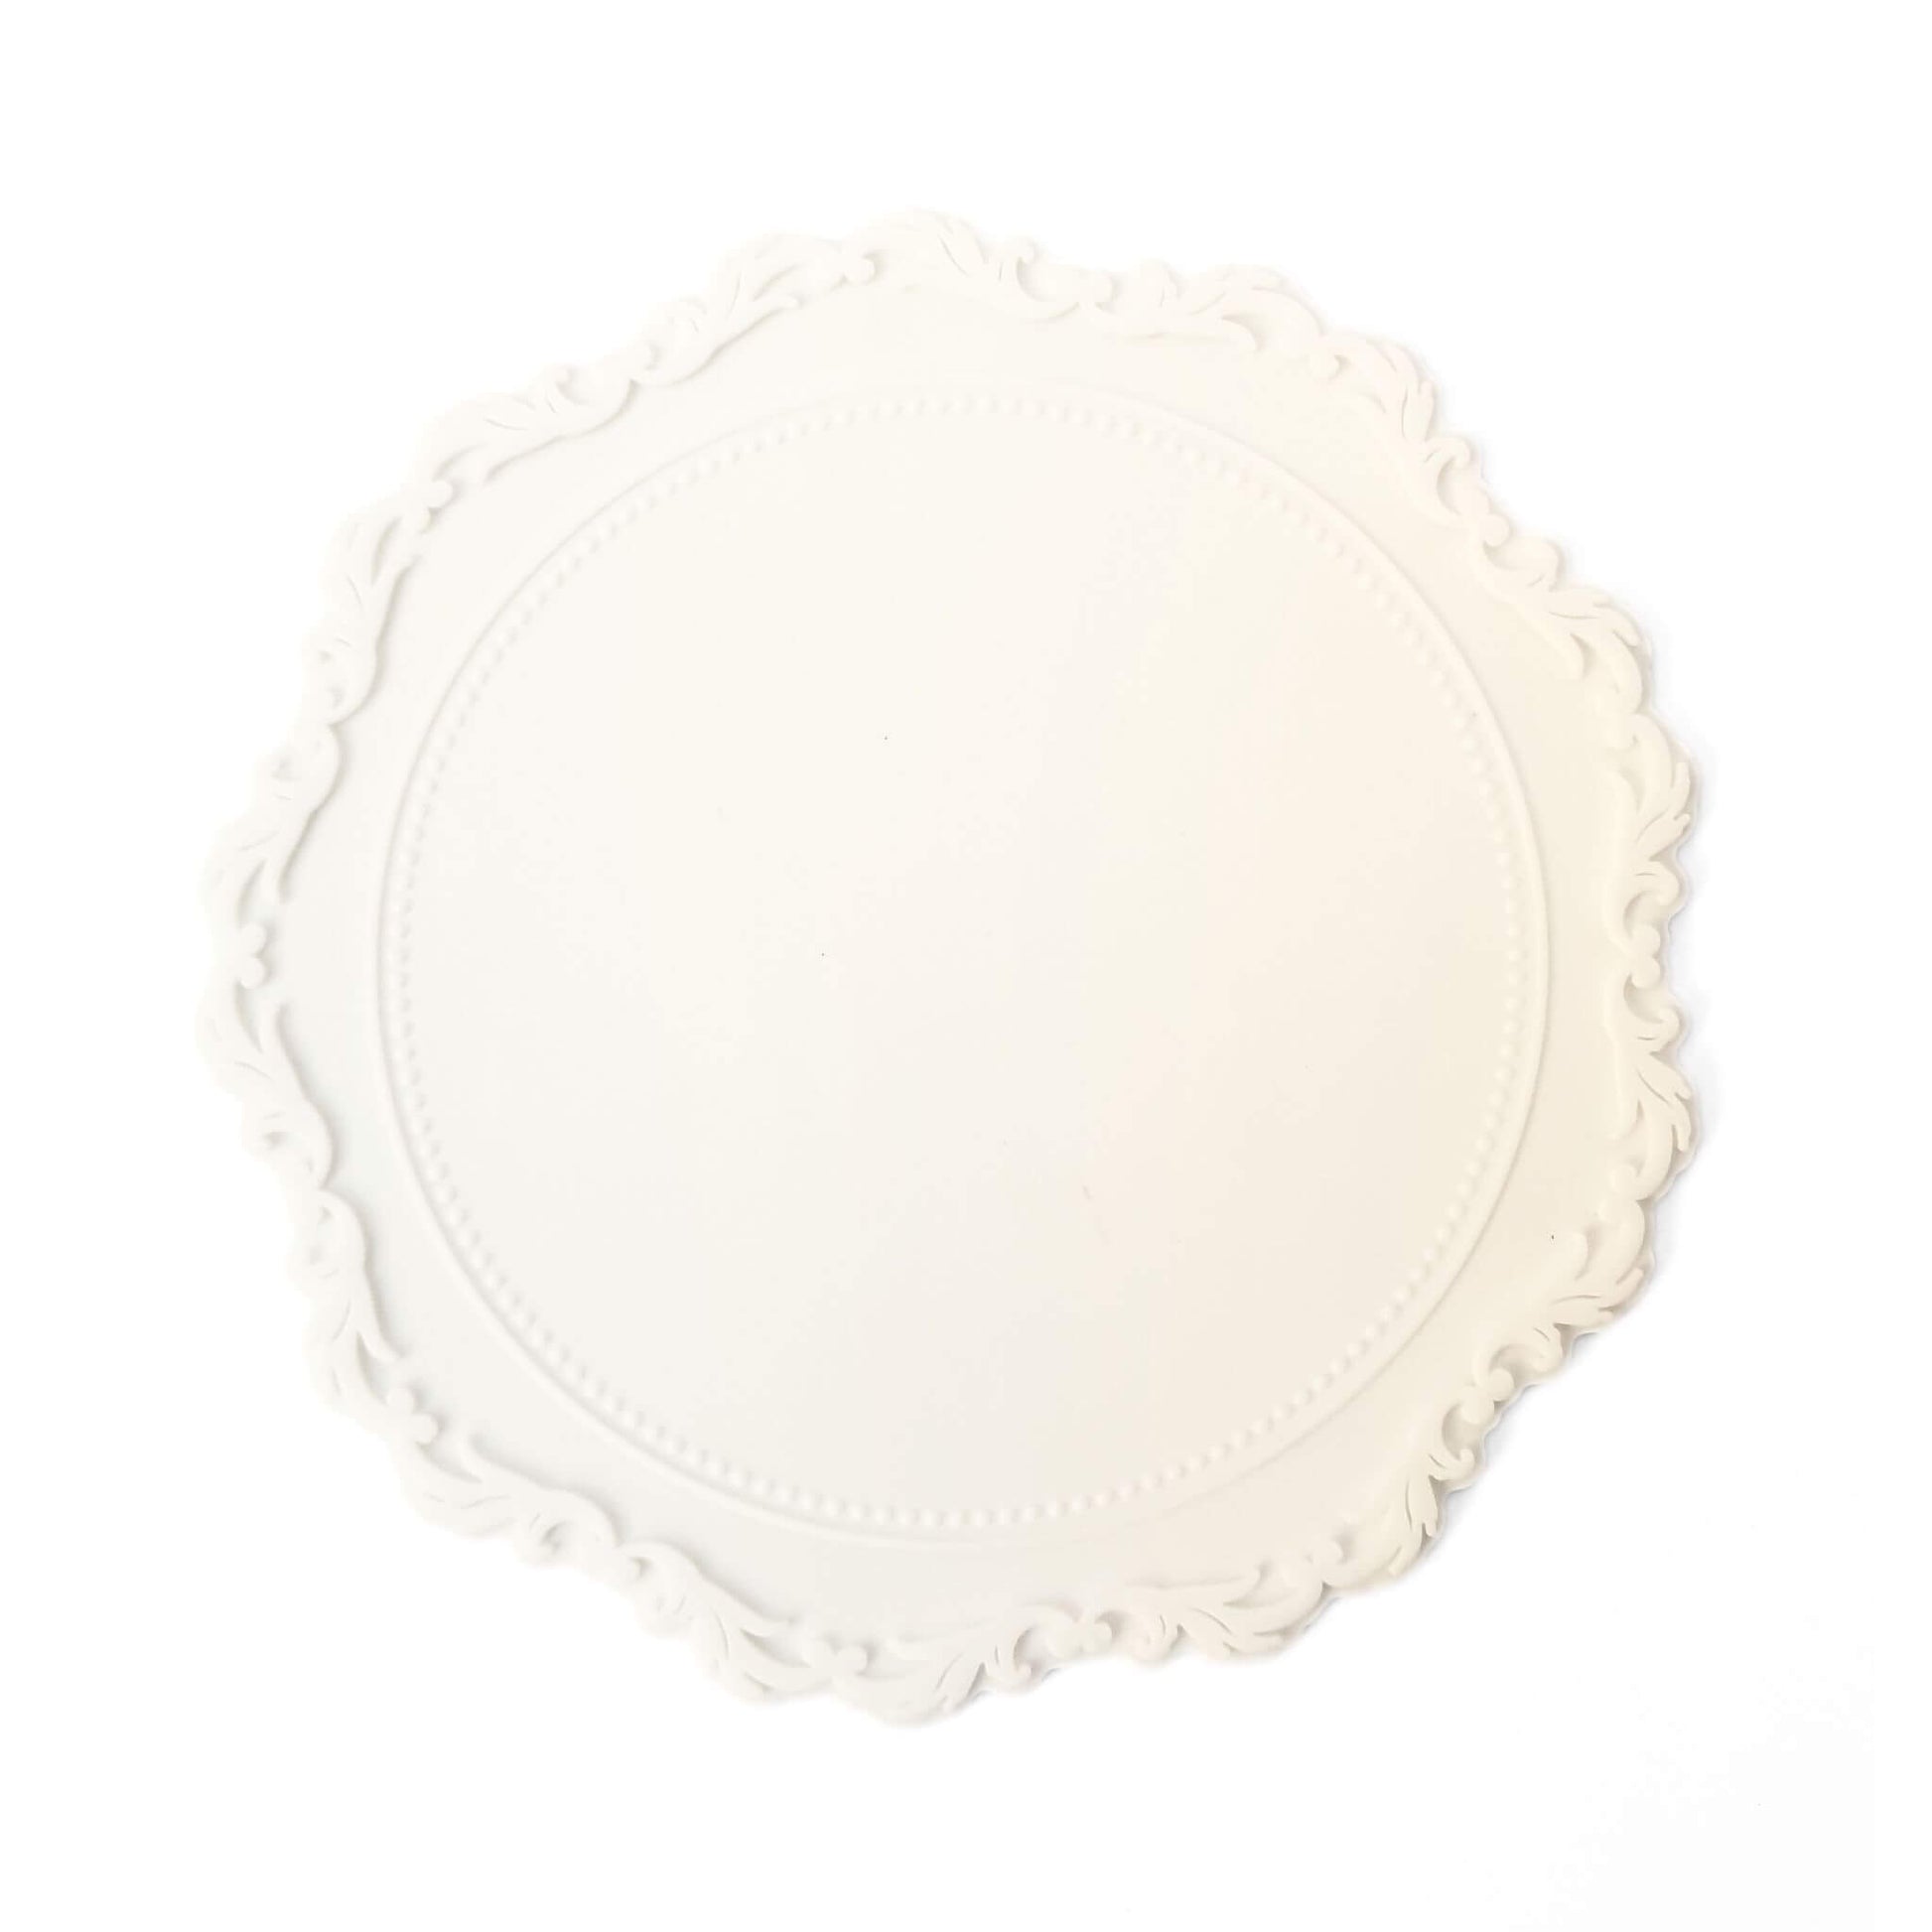 white round wax sealing mat with rococo style detail on border